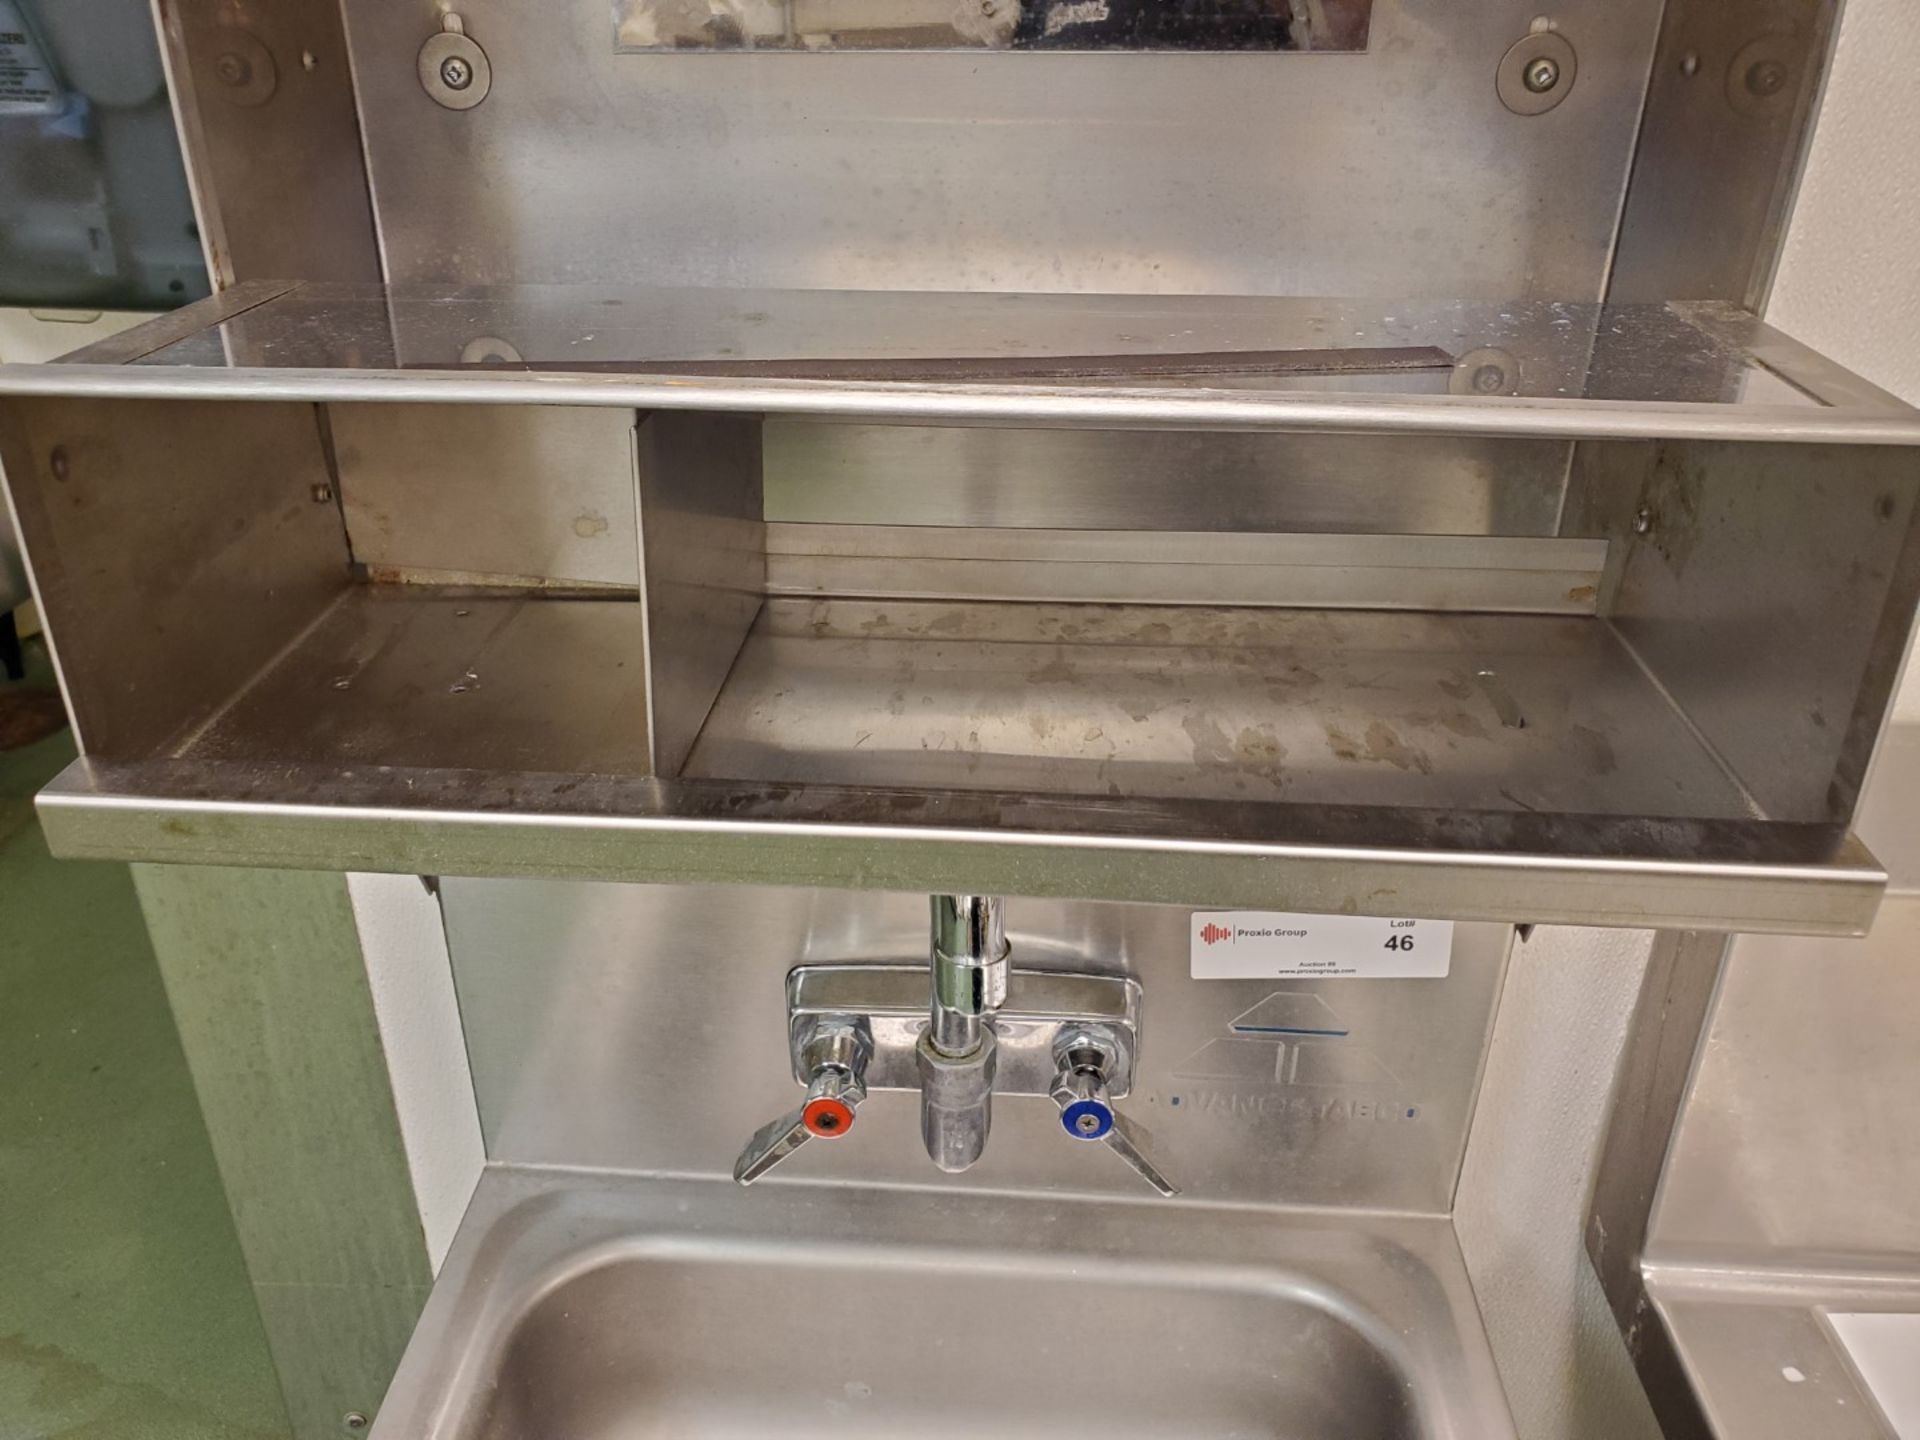 Advance Tabco Stainless steel wash station, model 7-PS-85